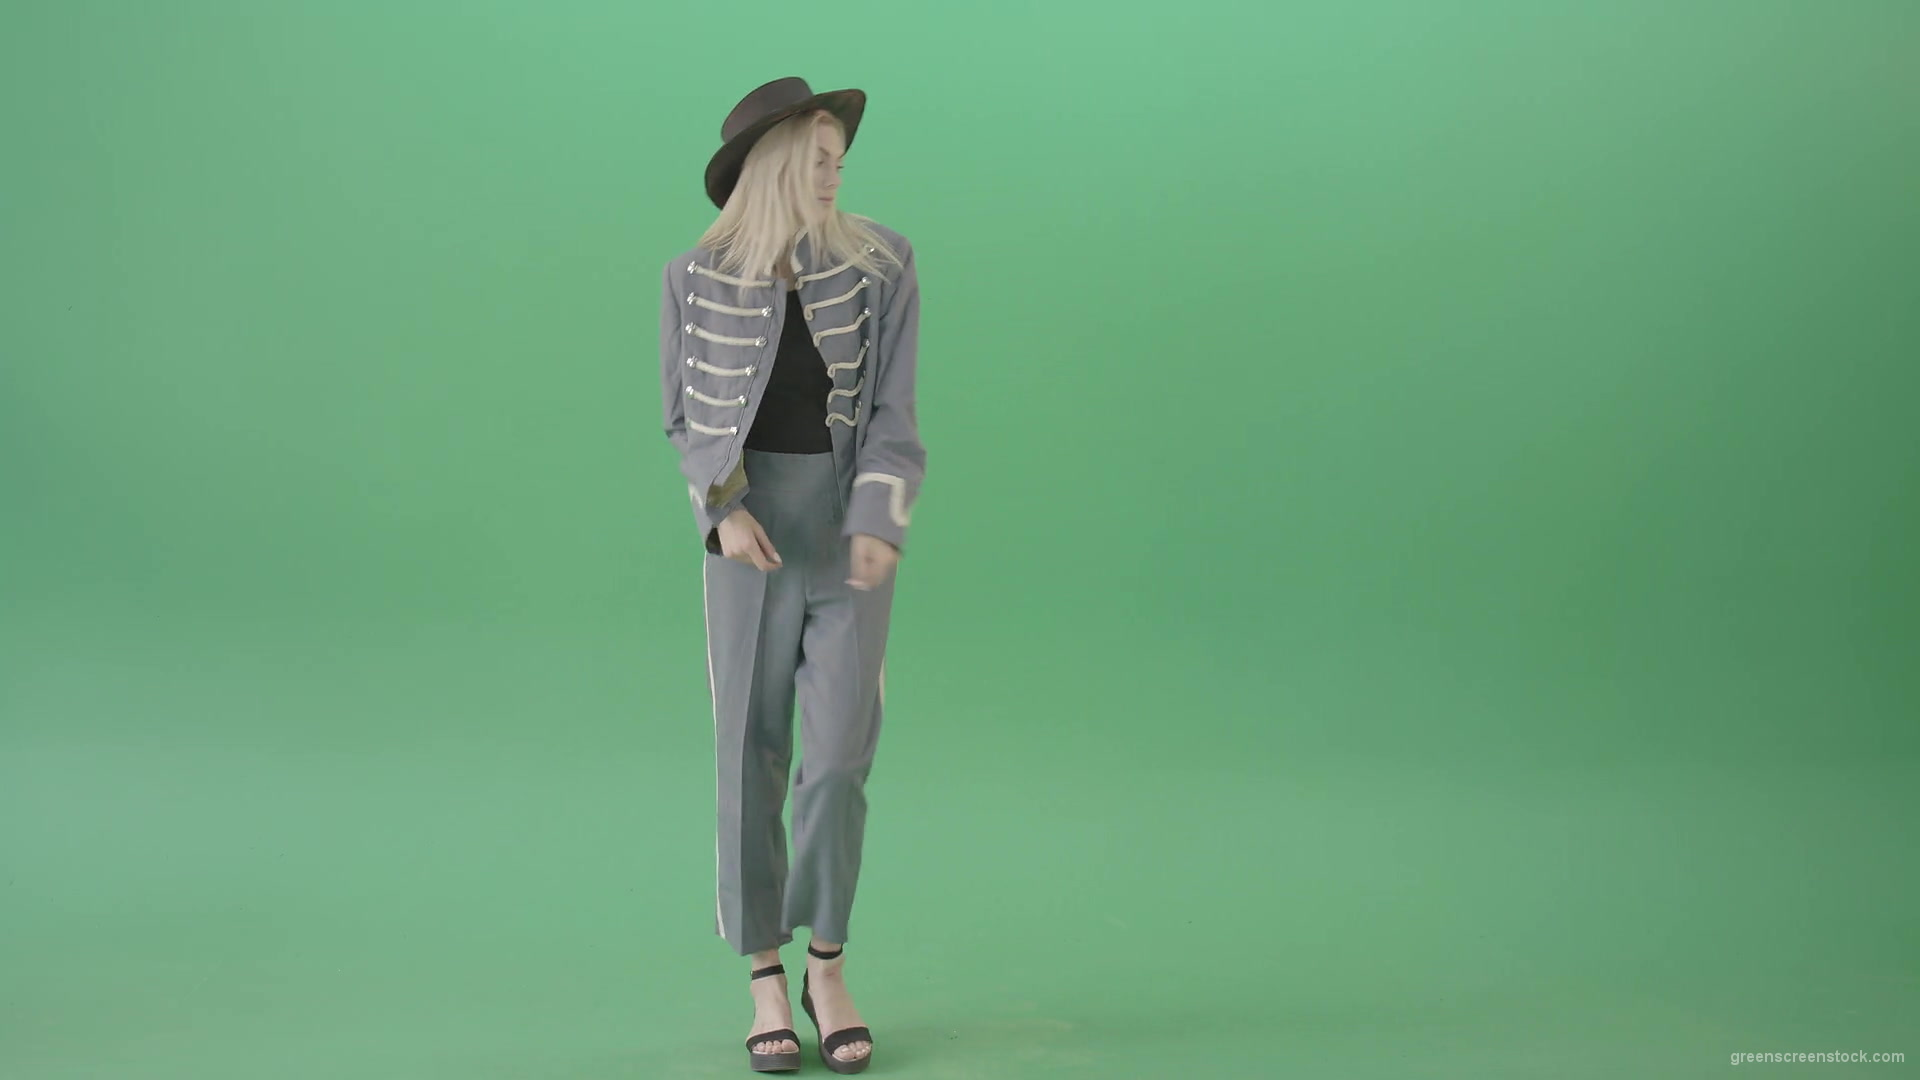 Blonde-Girl-in-Royal-dress-and-black-hat-dancing-house-and-chilling-in-green-screen-studio-4K-Video-Footage-1920_006 Green Screen Stock